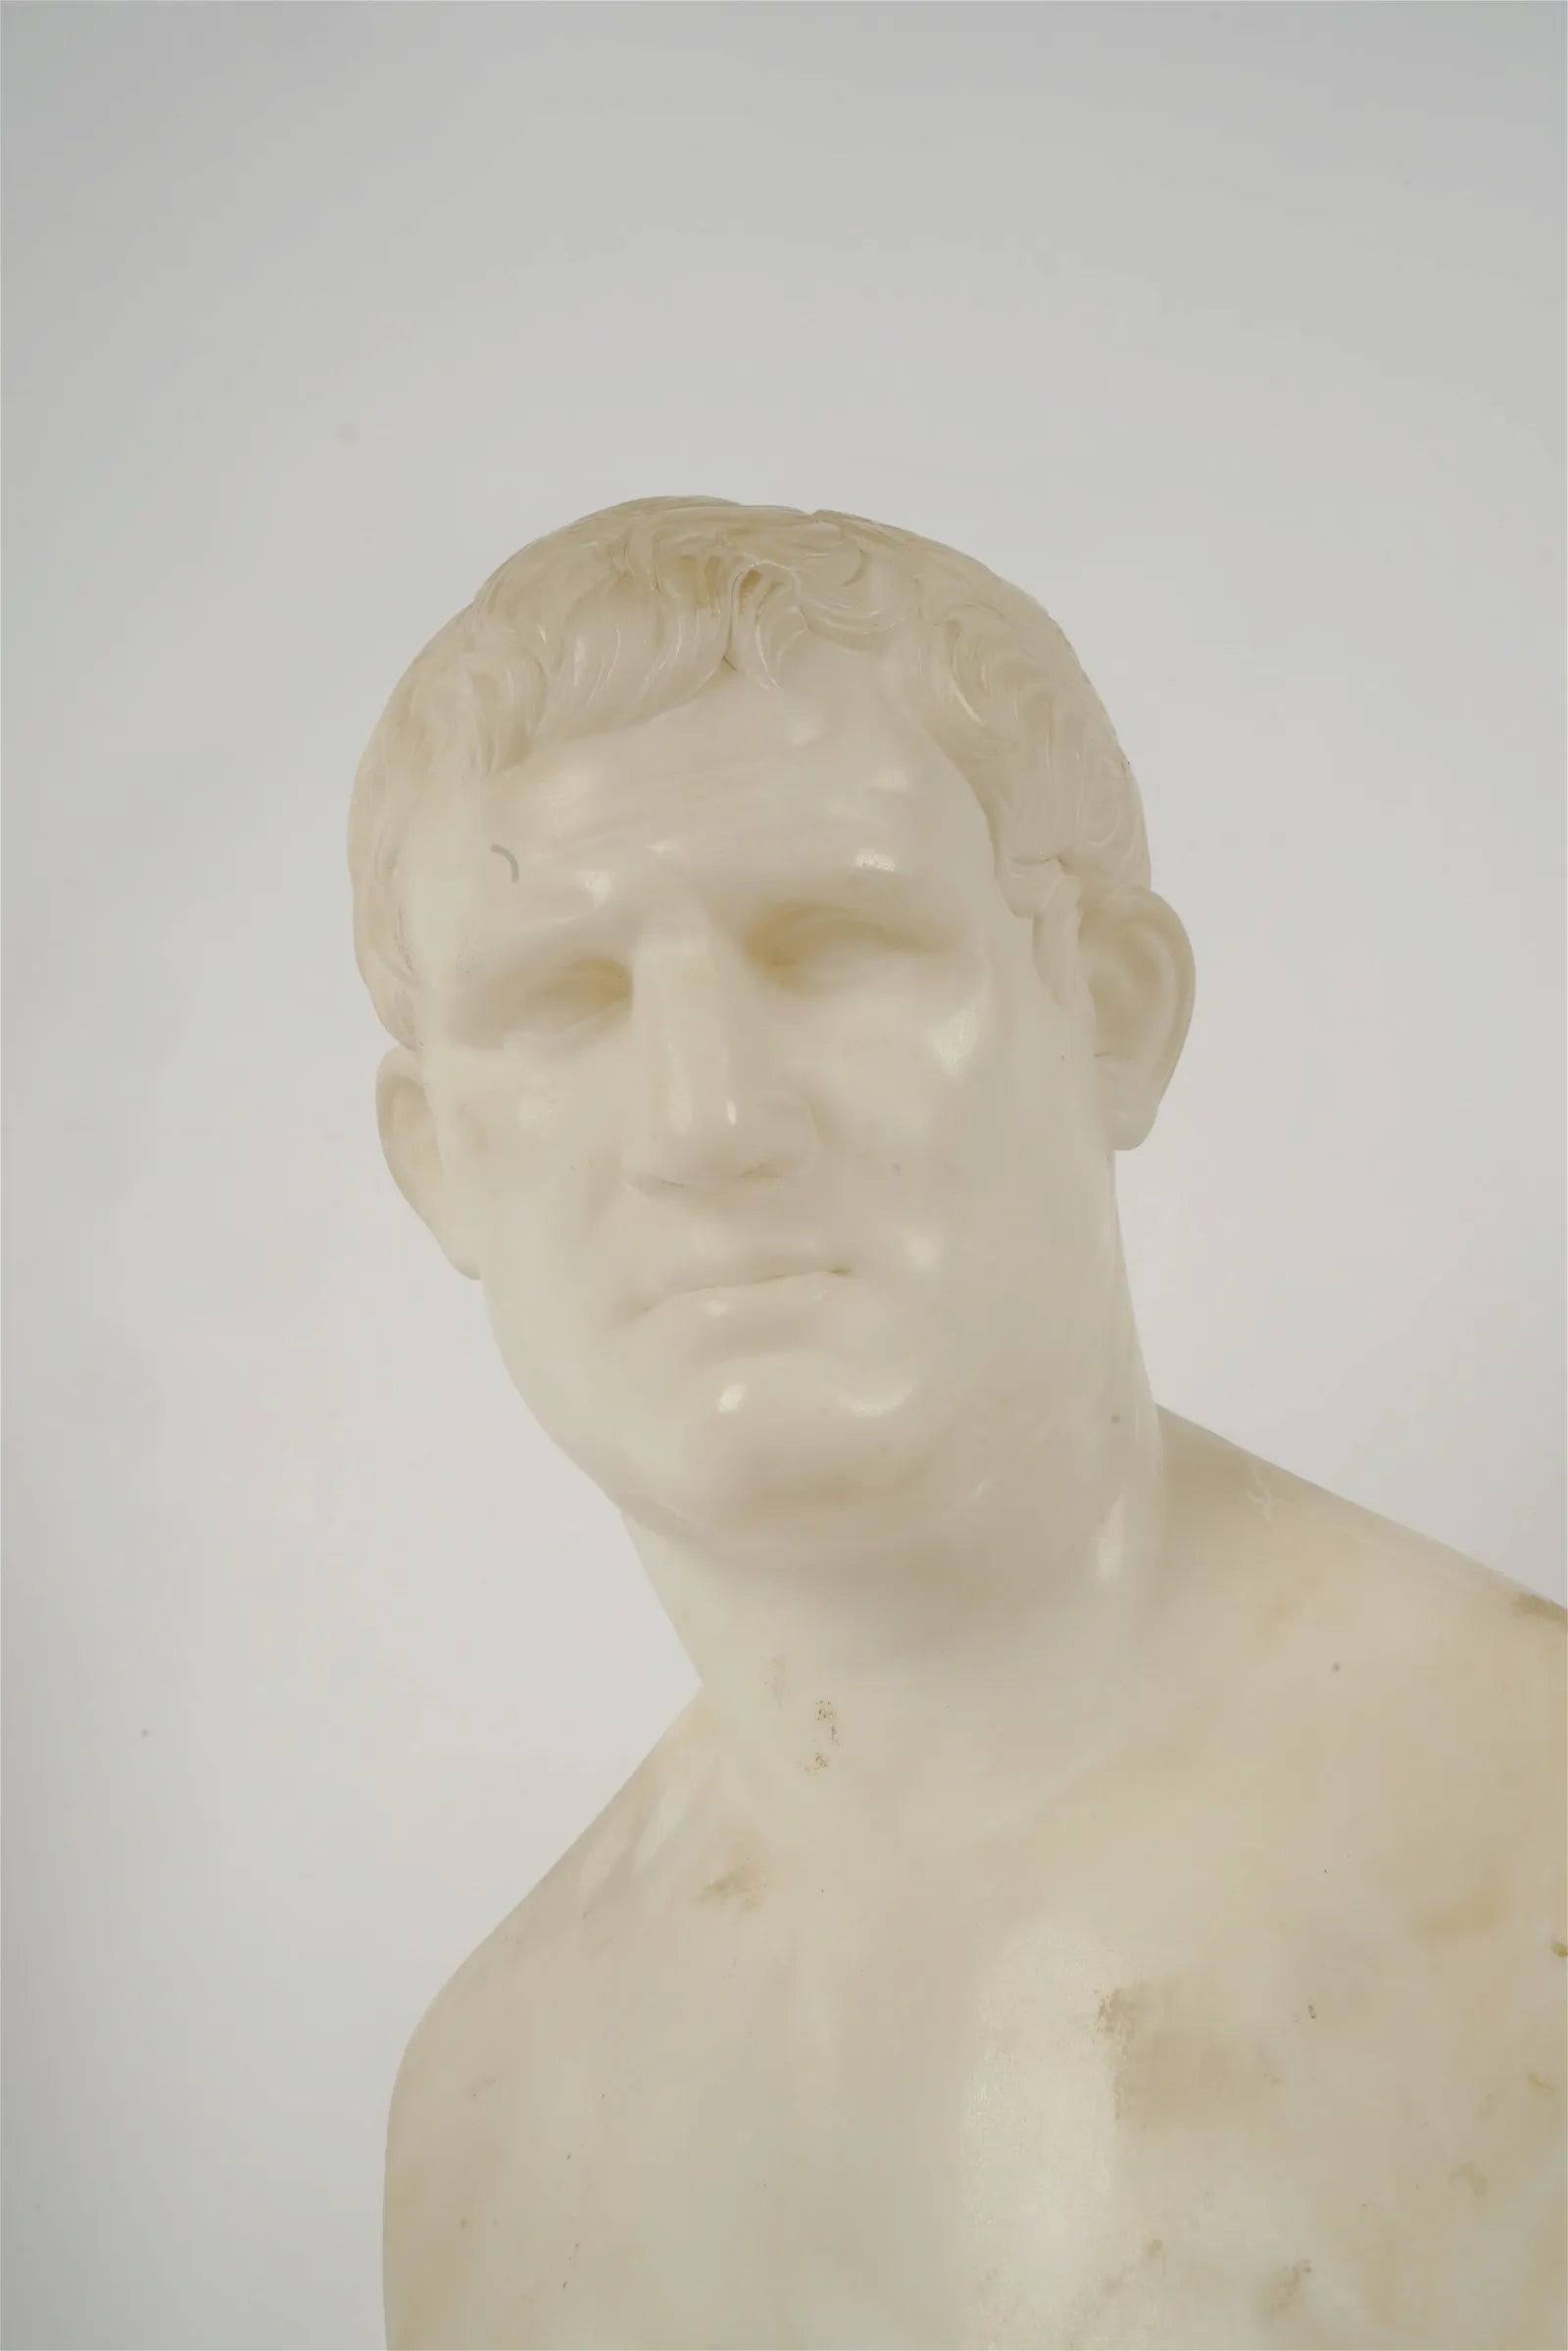 AW11-017: Late 19th Century Carved Marble Bust of Marcus Vipsanius Agrippa